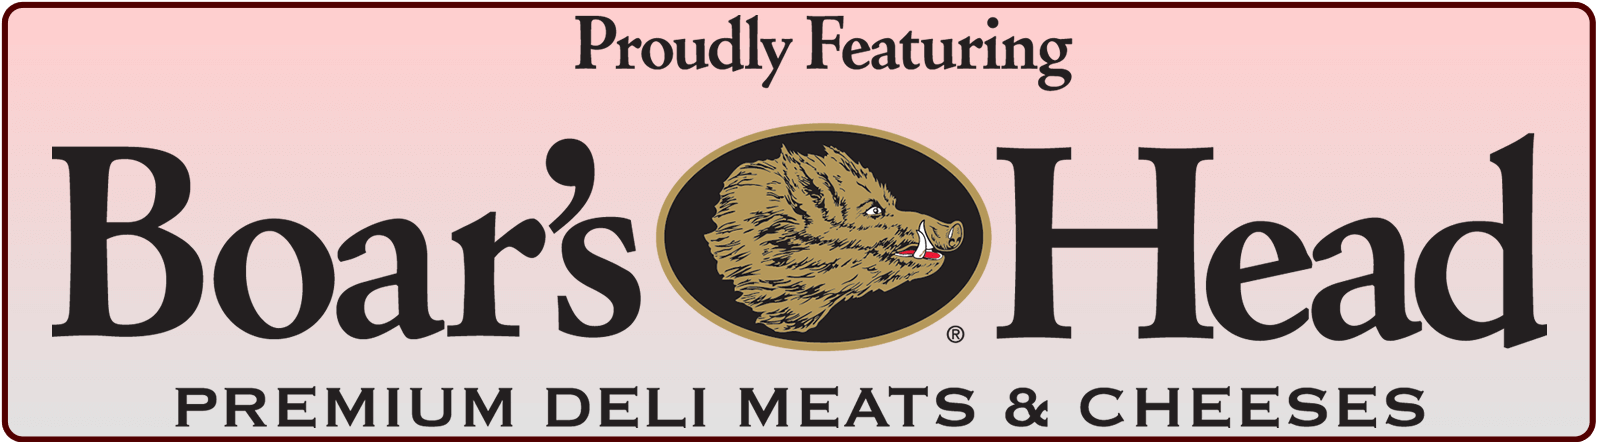 Proud to serve Boars Head meats and cheeses